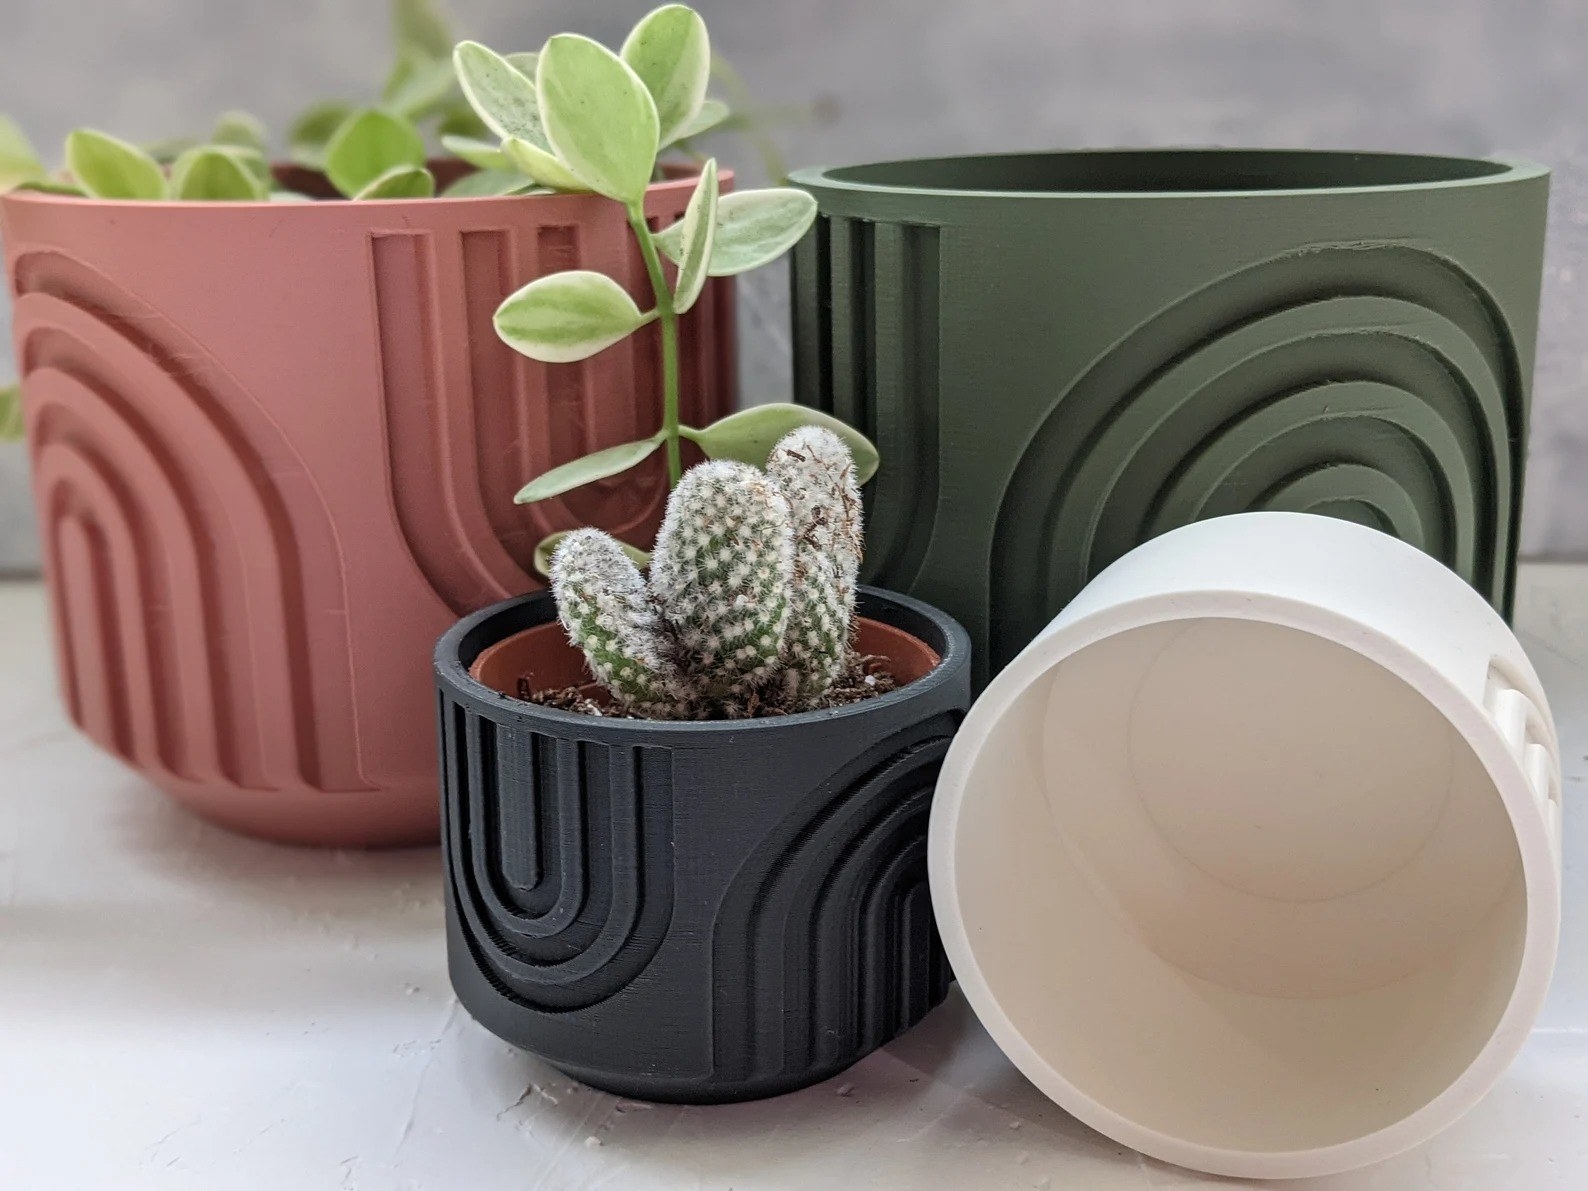 A collection of four colorful planters is shown